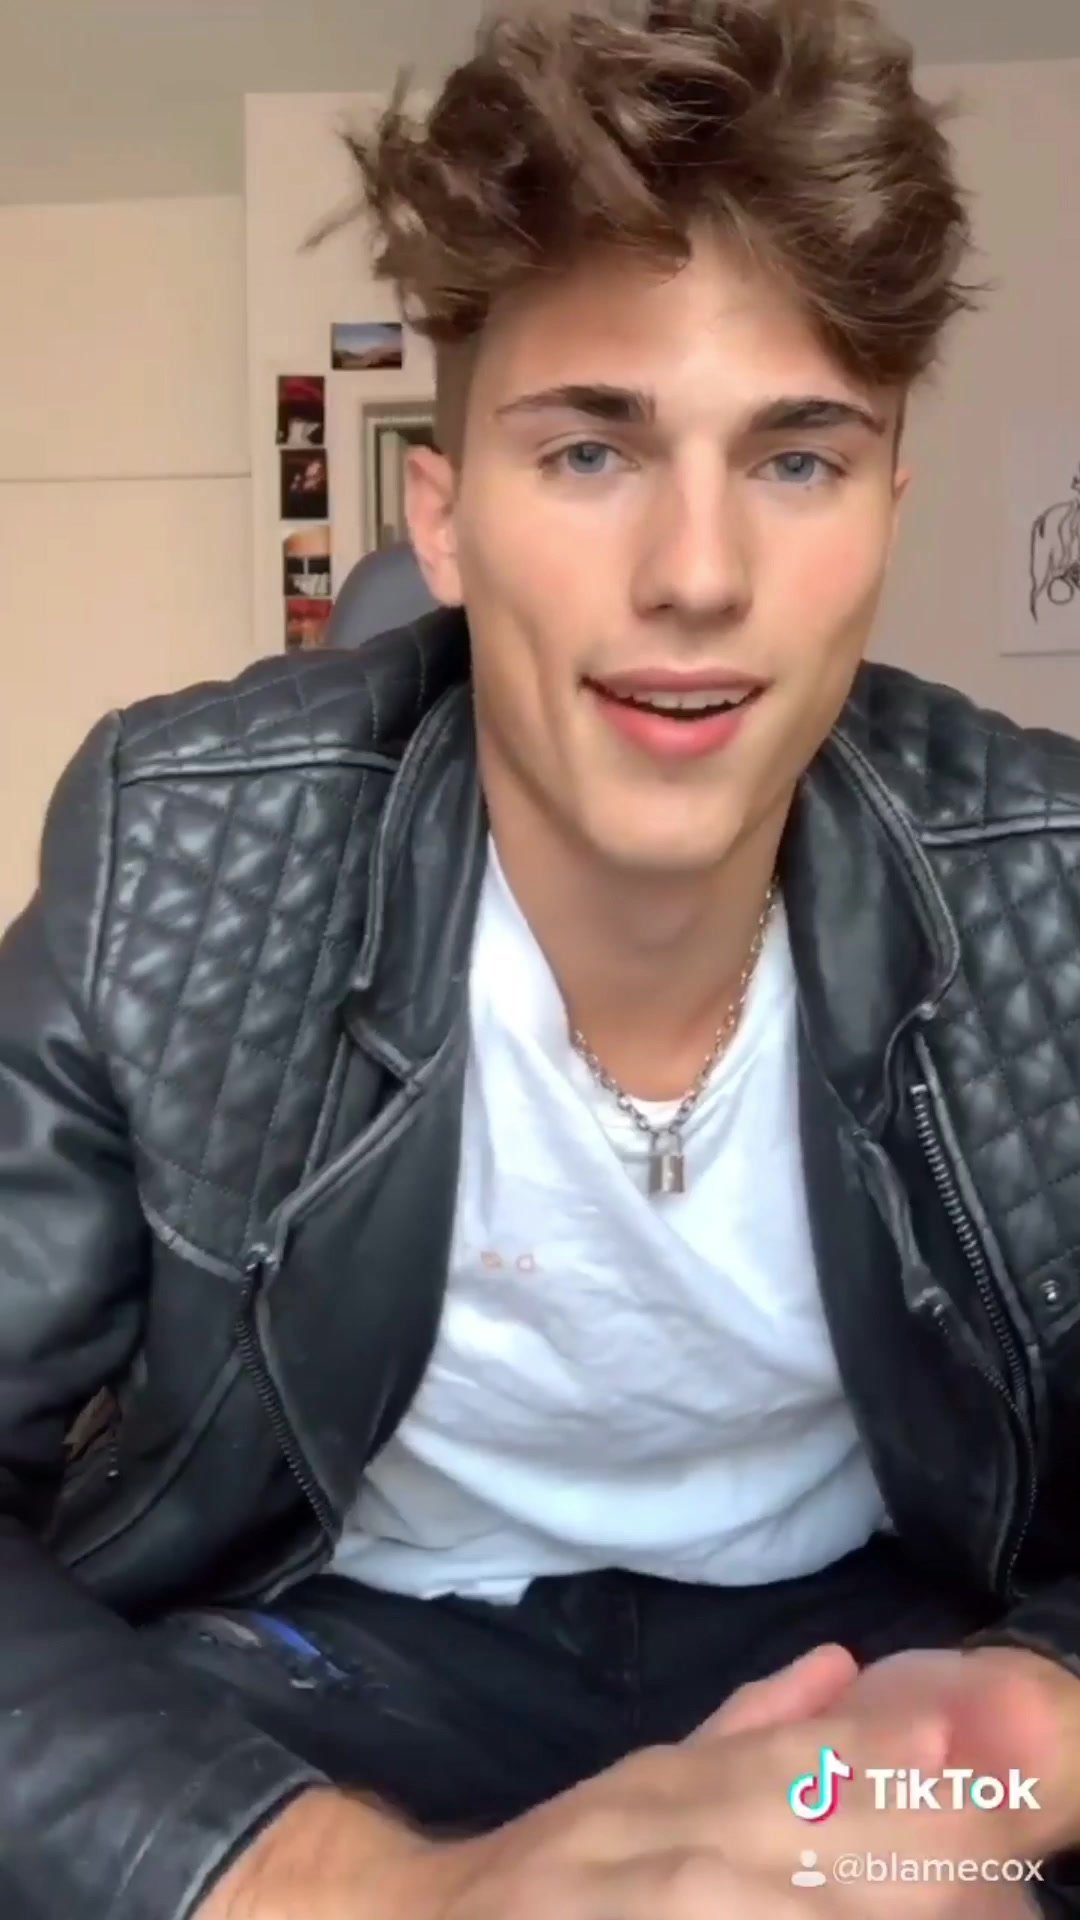 A cute twink in leather